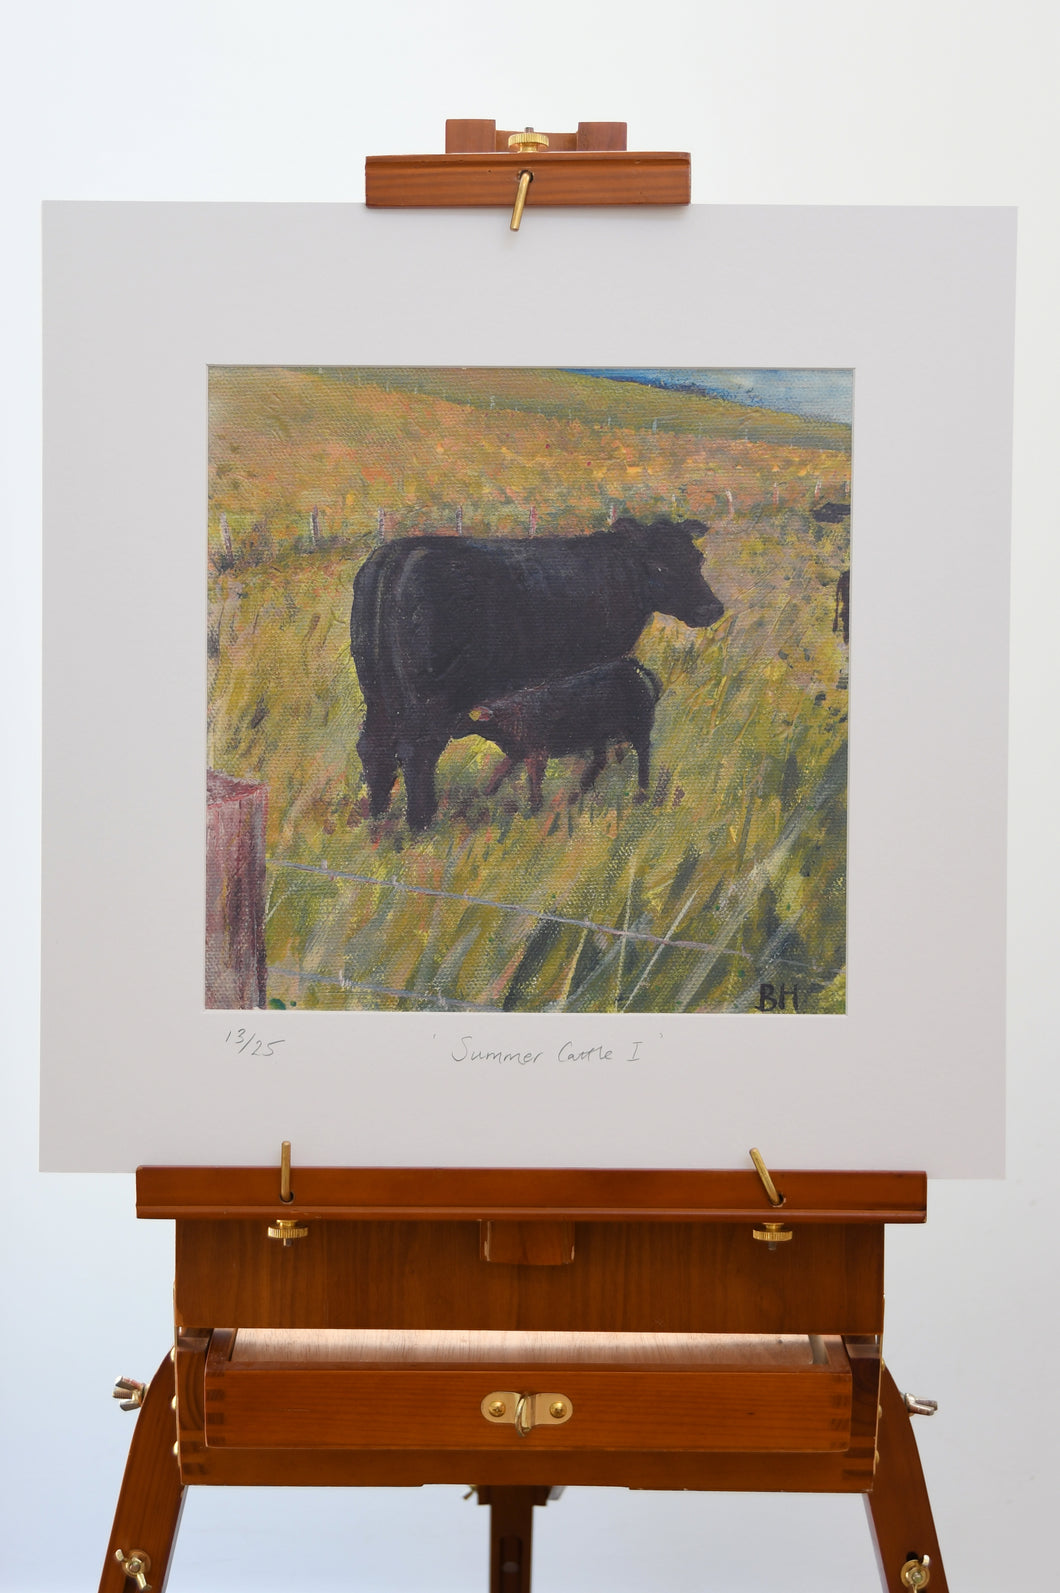 Taken from an Original acrylic painting on canvas, this print depicts a summery scene at the family farm. The Aberdeen Angus cow with newborn calf at foot, vivid green grass and buttercups blowing in the Orkney wind.  Dimensions of print are 31cm x 31cm.